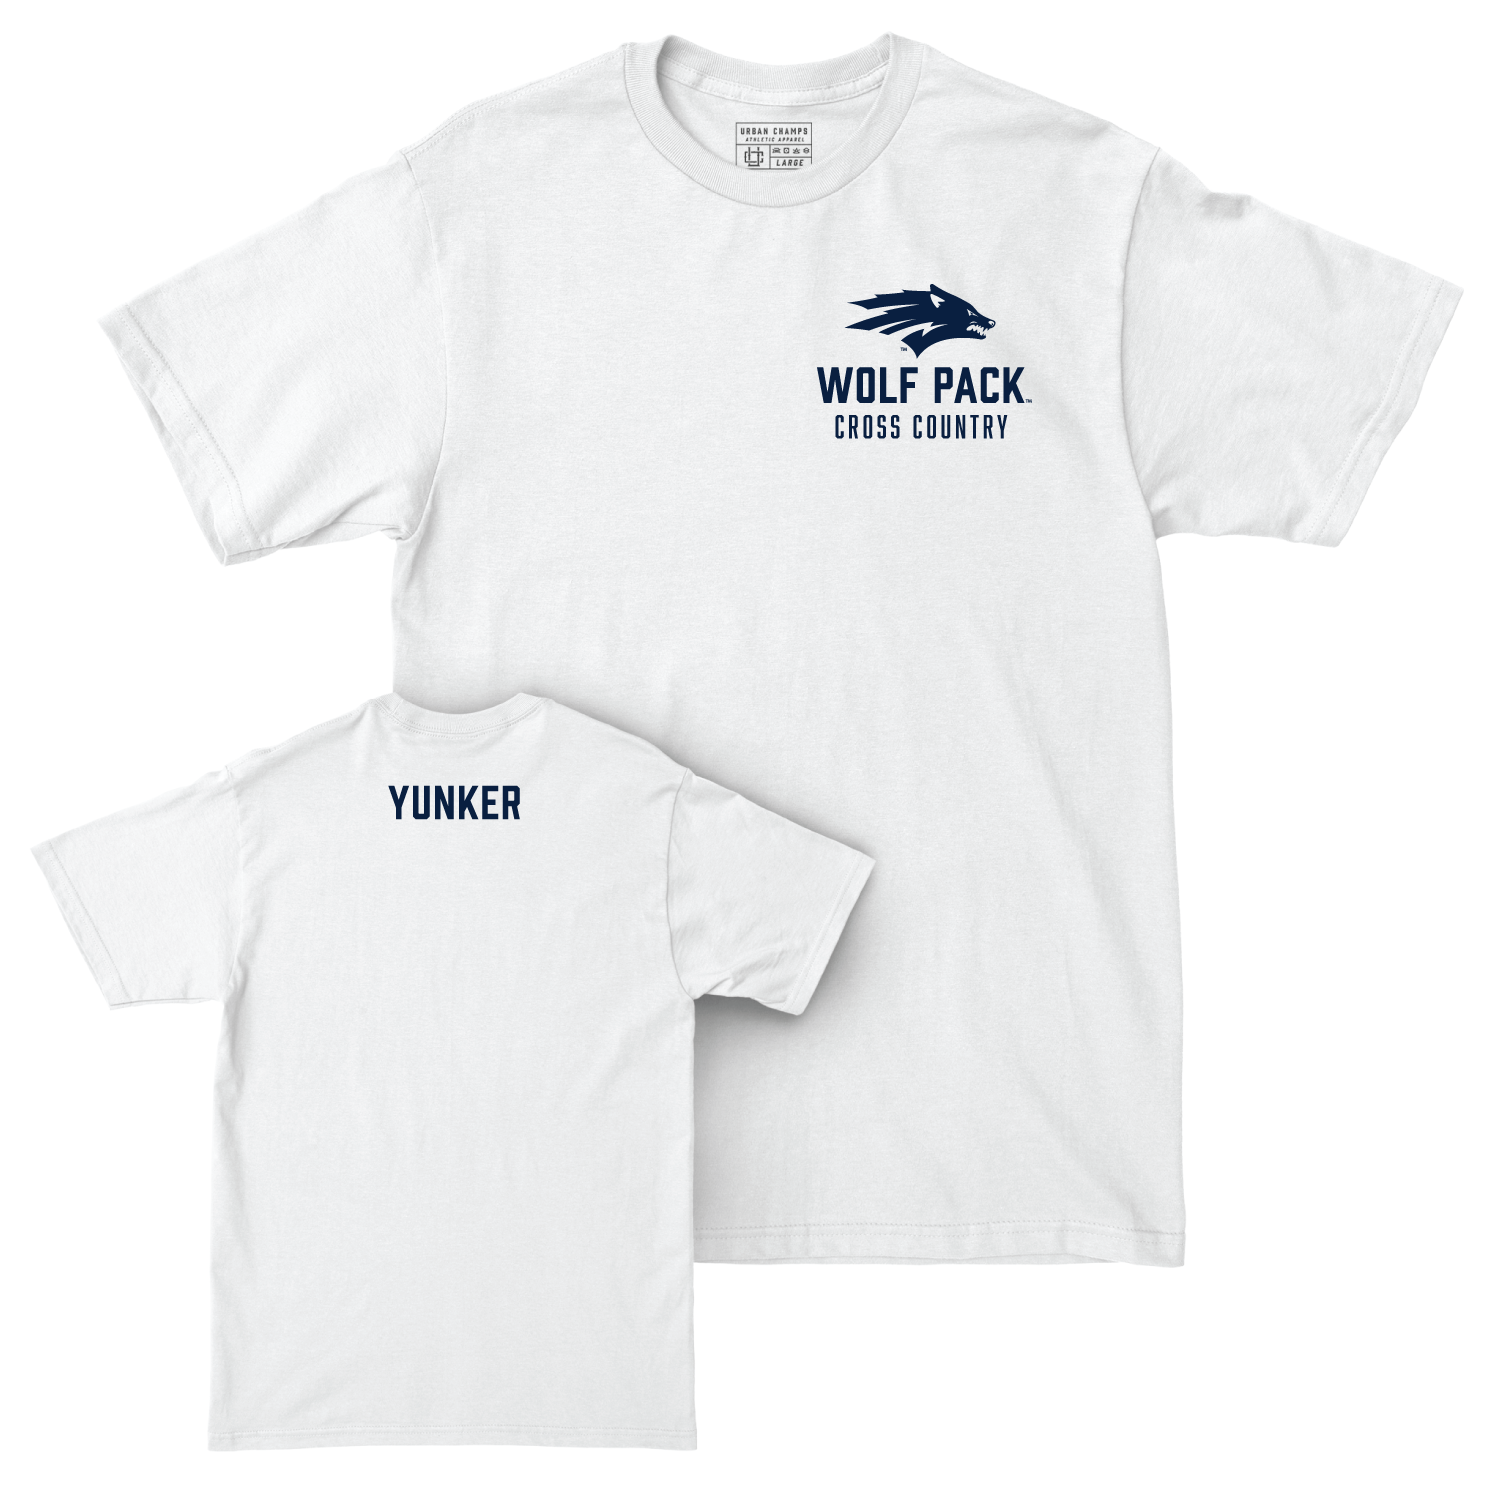 Nevada Men's Cross Country White Logo Comfort Colors Tee - Eddie Yunker Youth Small